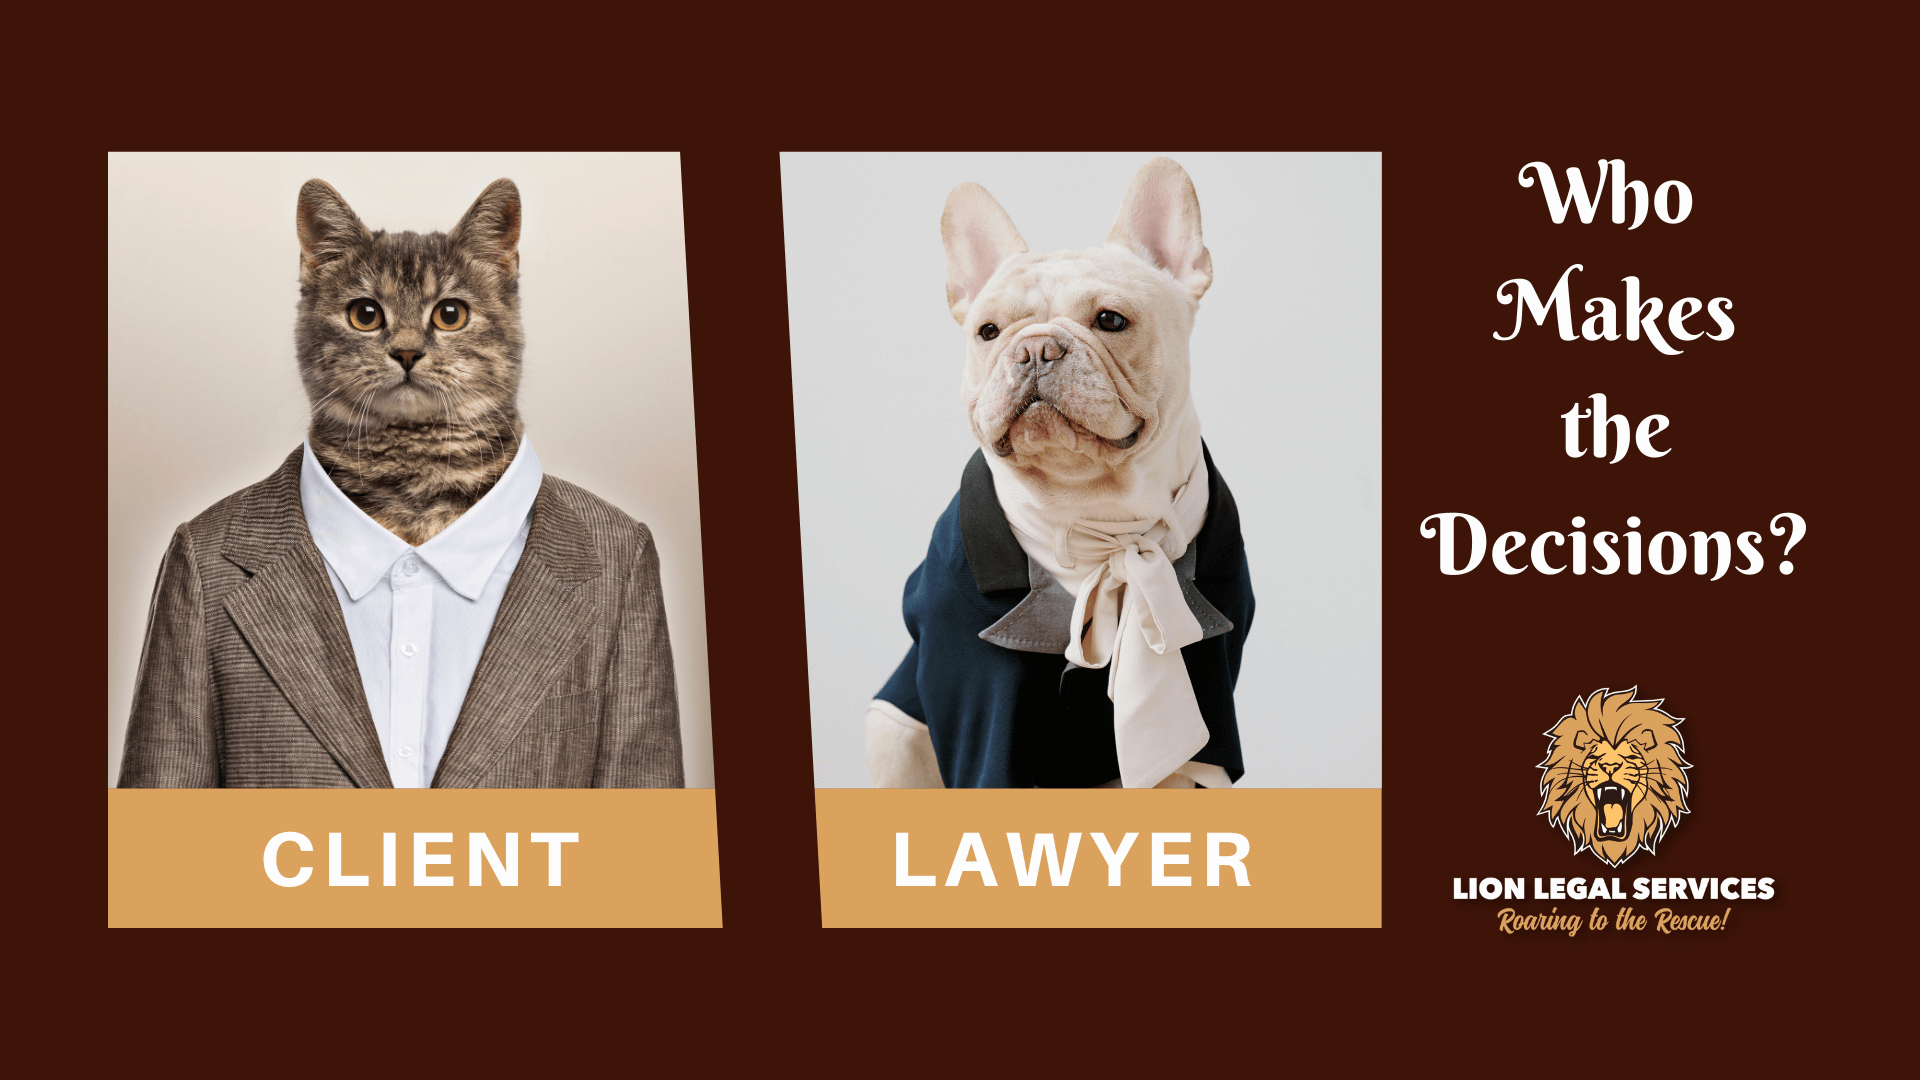 This image of a cat in a suit, and a bulldog in a lawyers scarf, asks the question "Clients vs lawyers. Who decides?